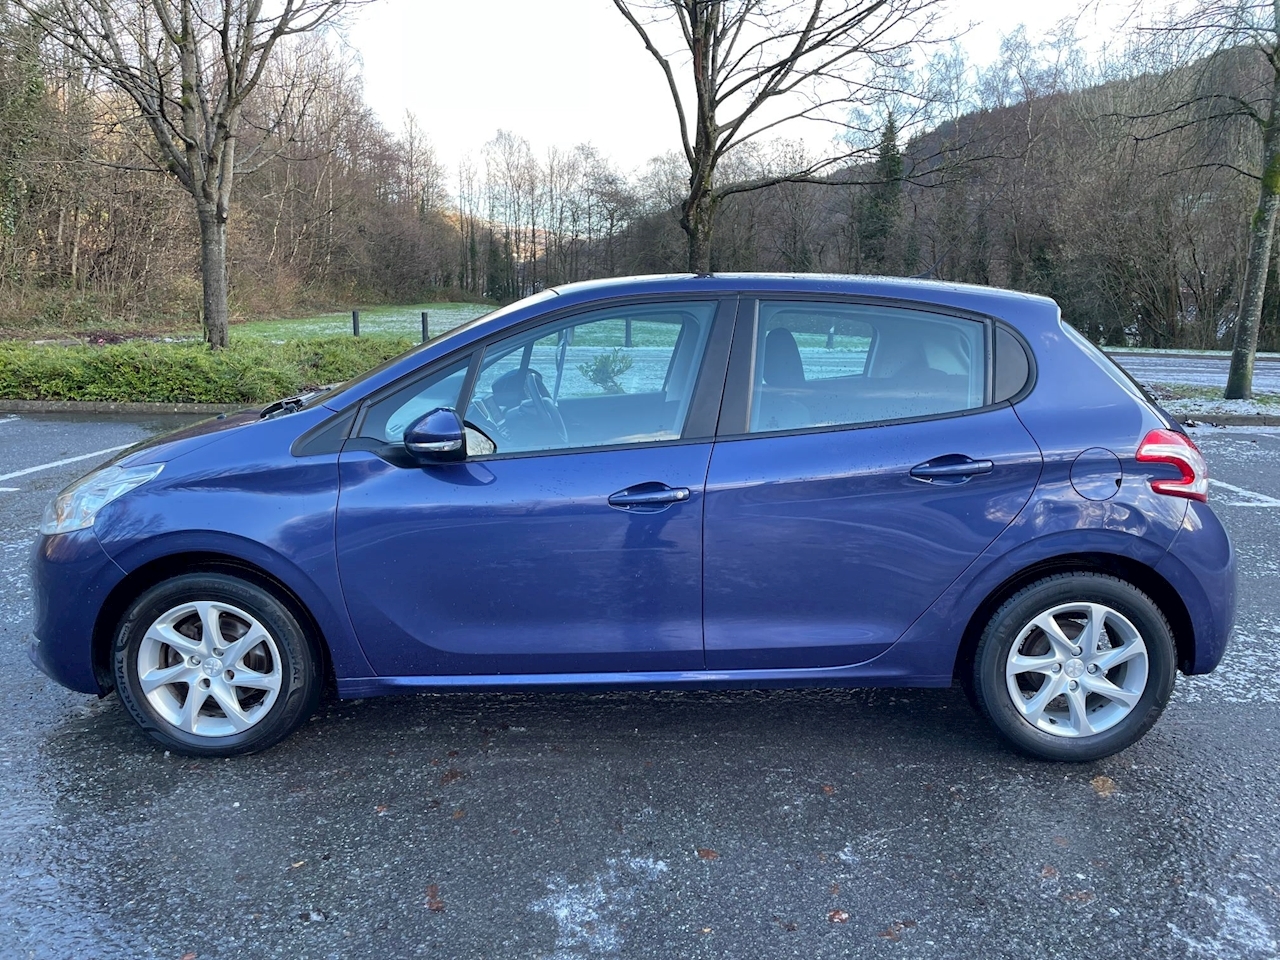 1.4 HDi Active Hatchback 5dr Diesel Manual Euro 5 (70 ps)